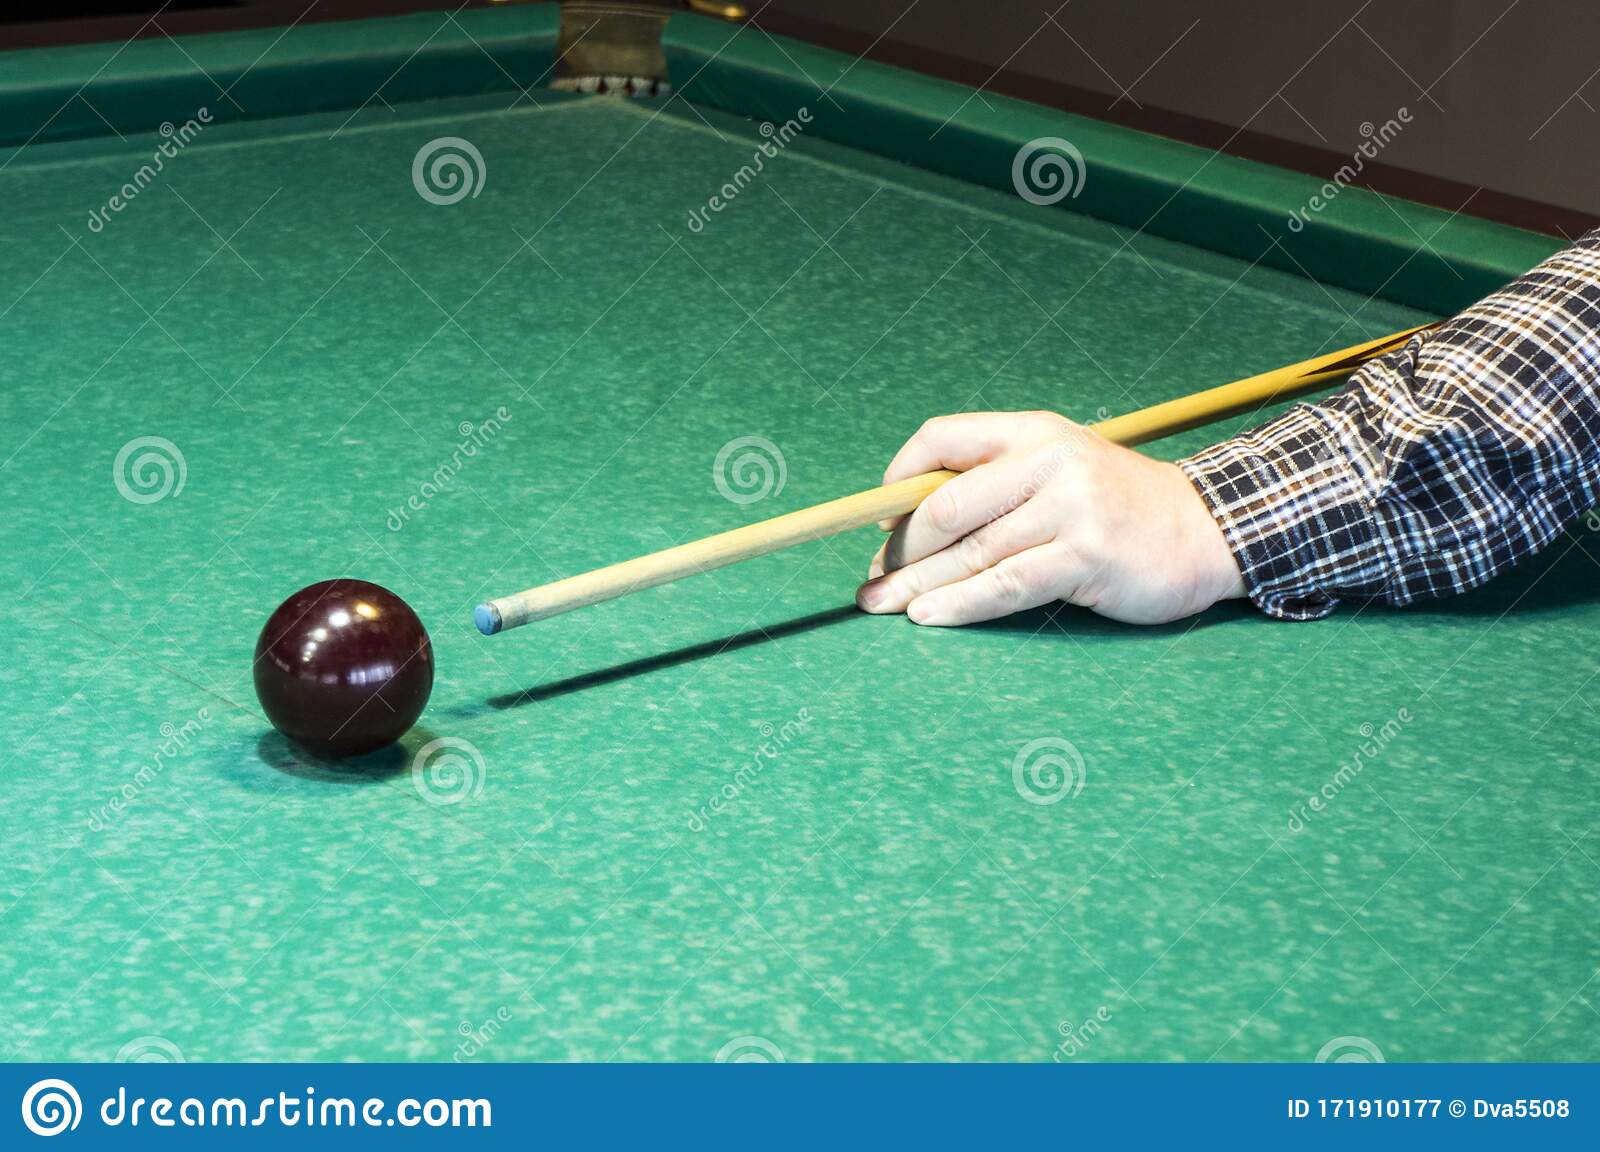 snooker and pool table